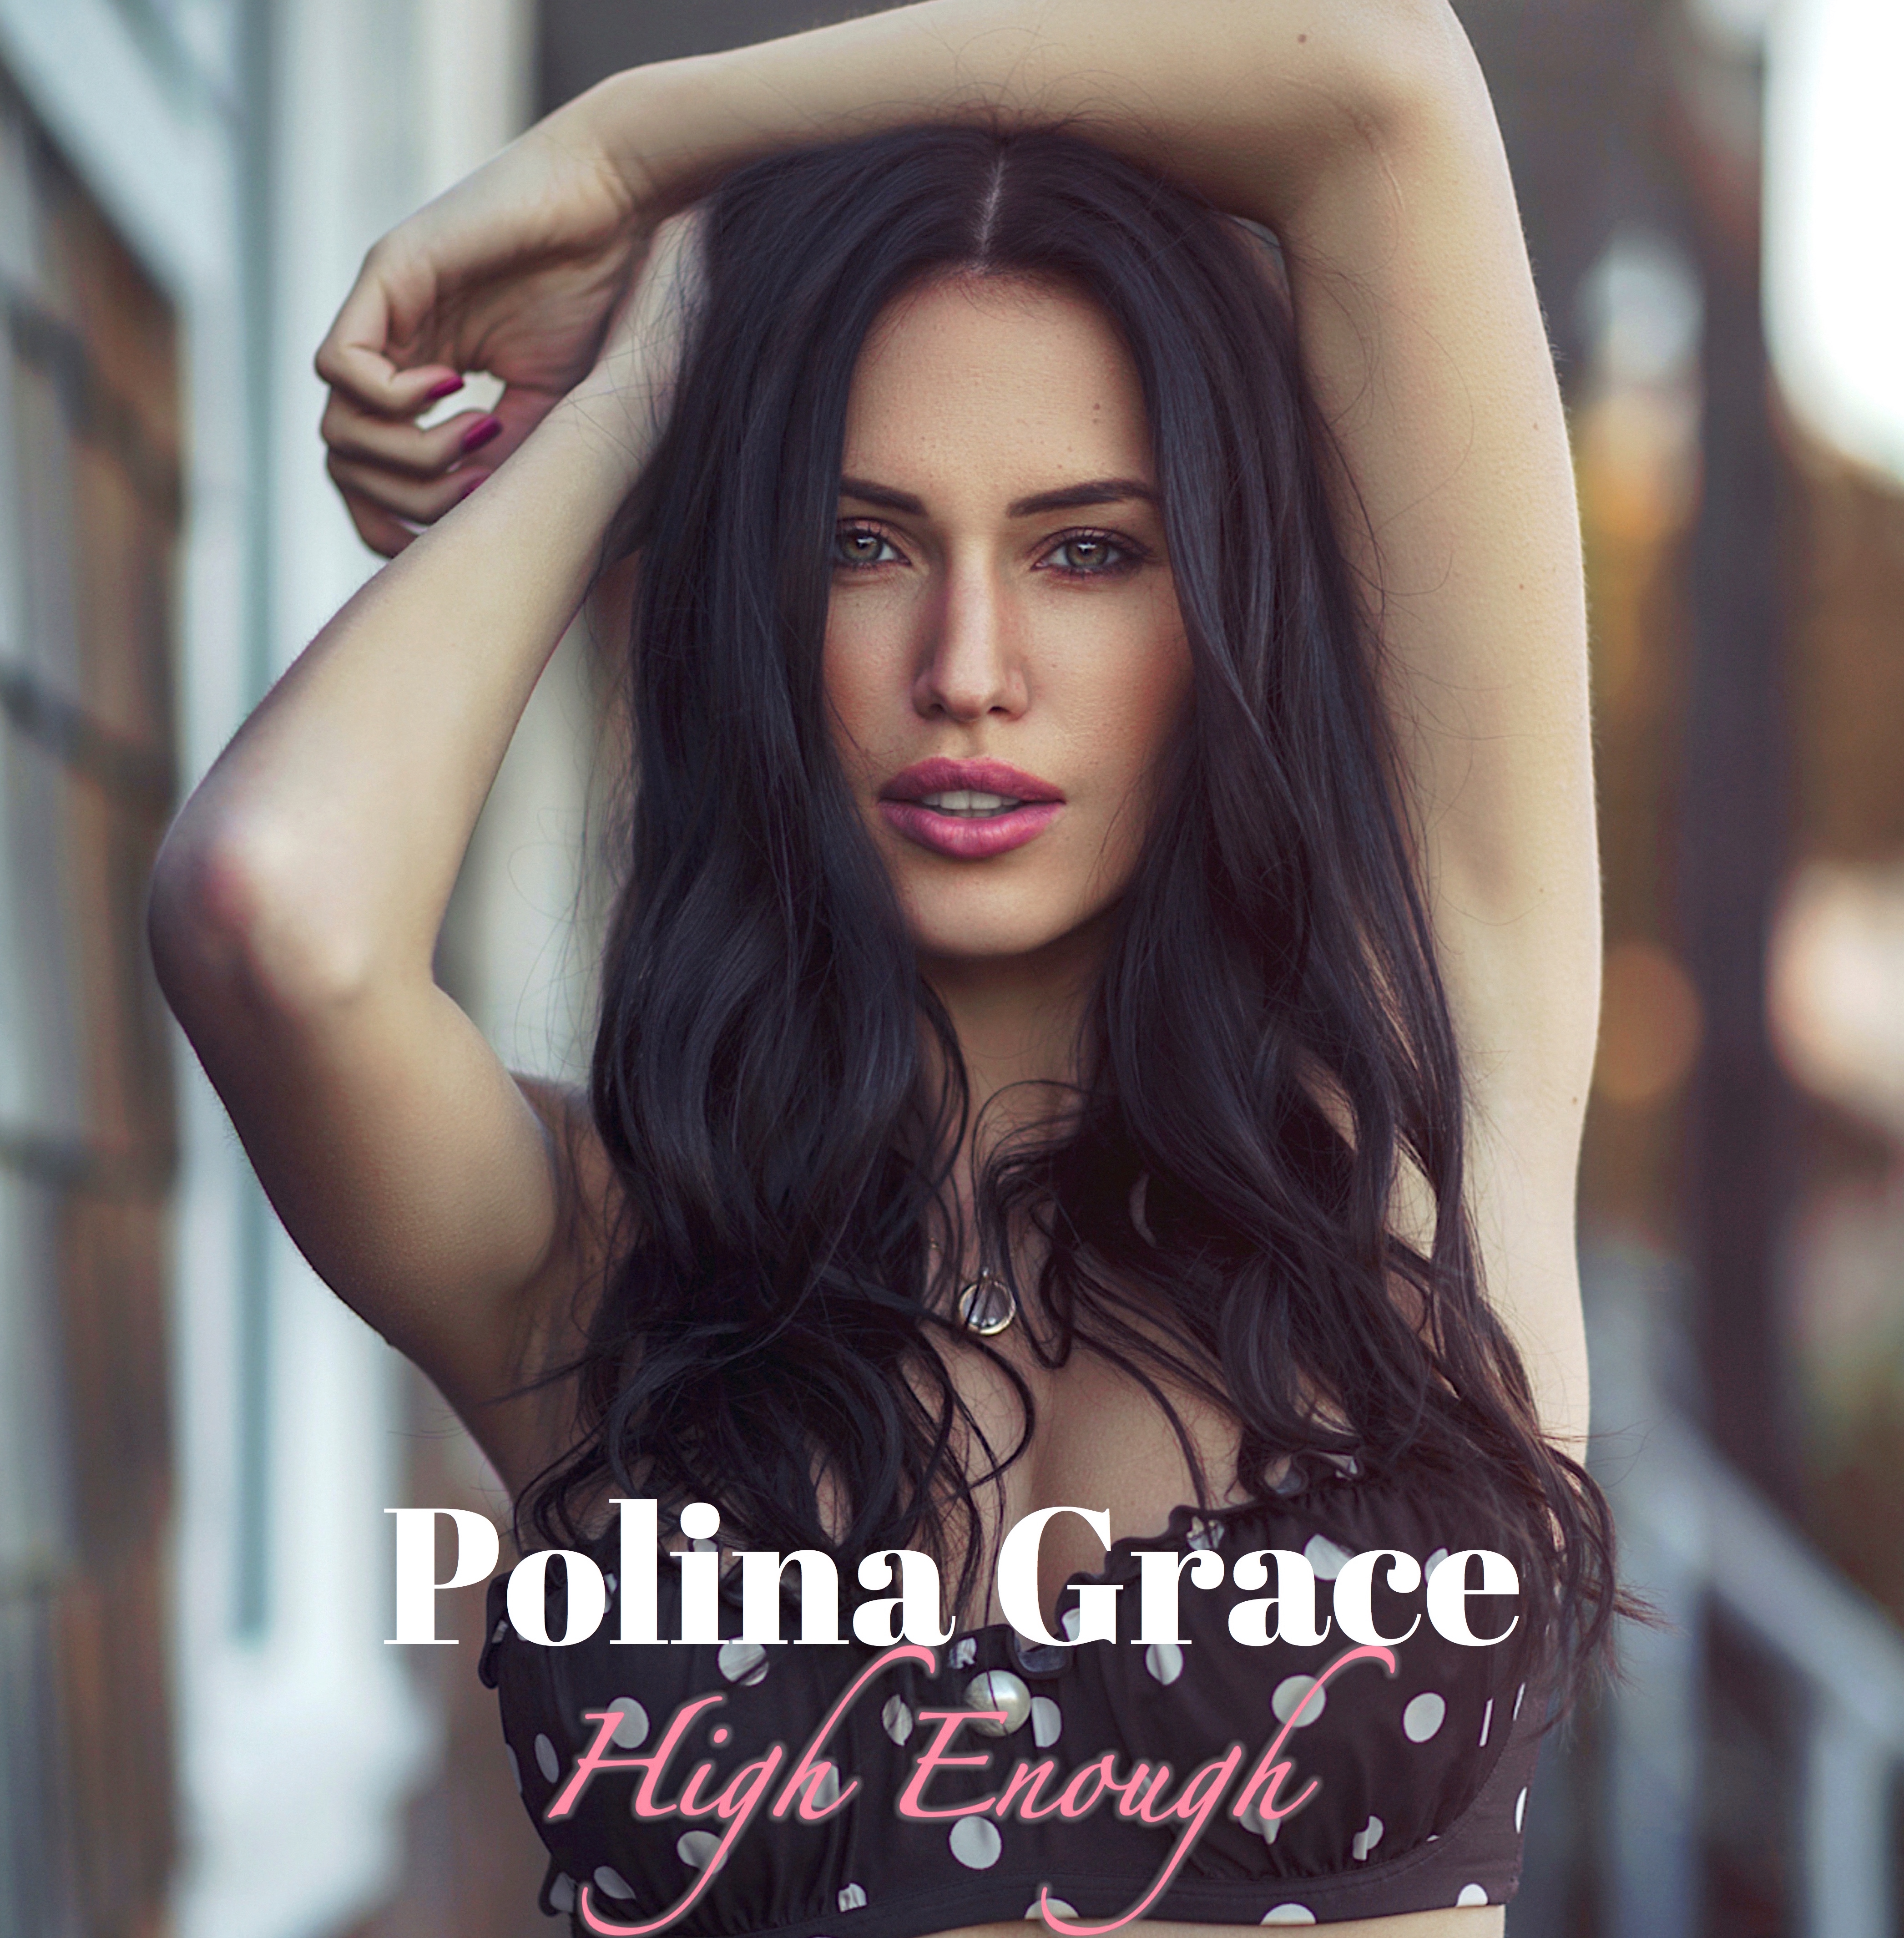 Canadian Model Turned Musician POLINA GRACE Drops Game-Changing New ...
